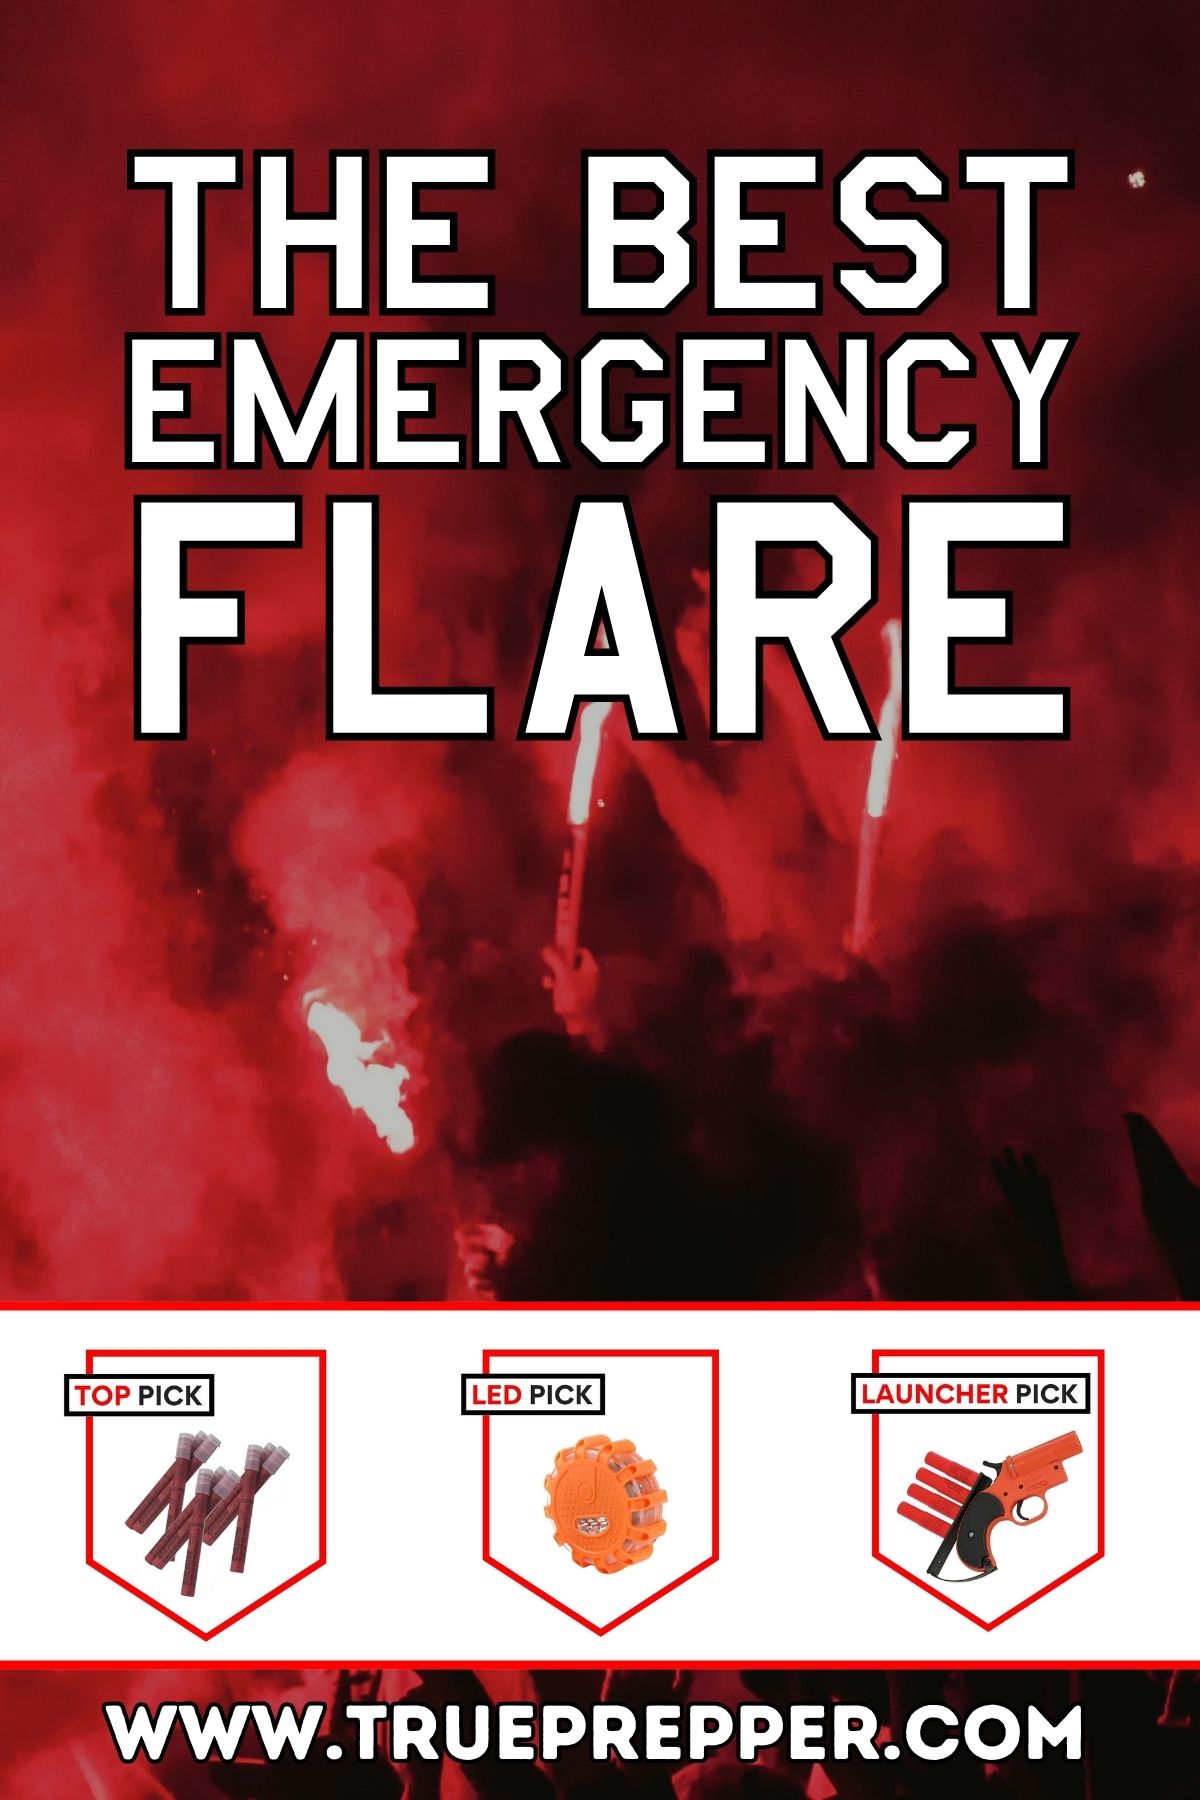 The Best Emergency Flare